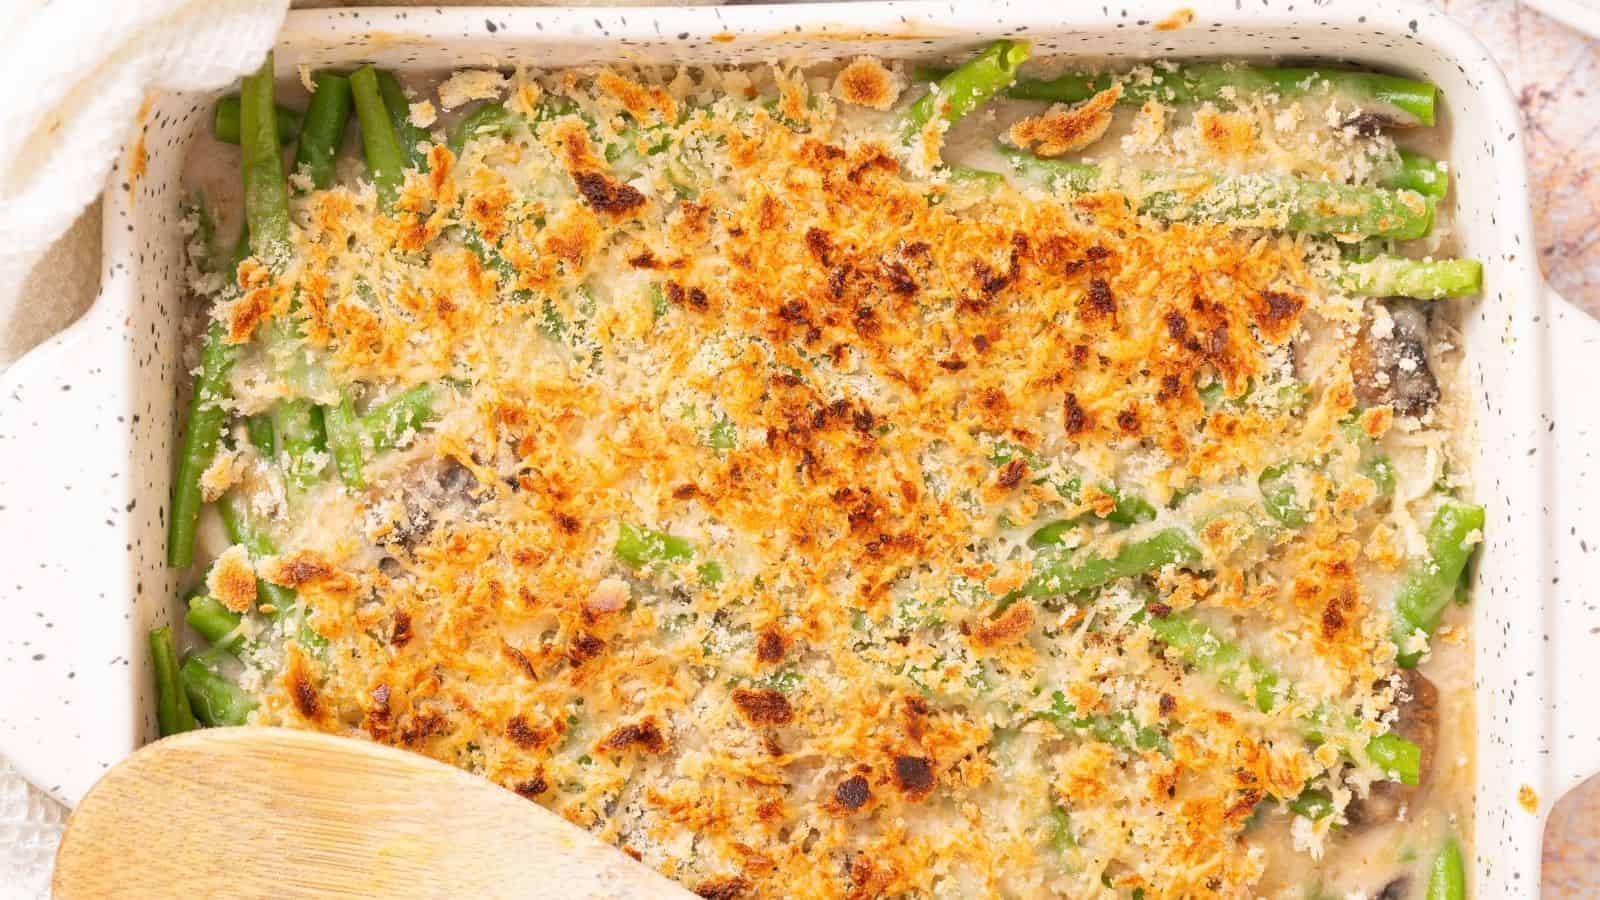 An image of a white plate with a serving of cheesy green bean casserole with a fork on the side, and the casserole behind it.